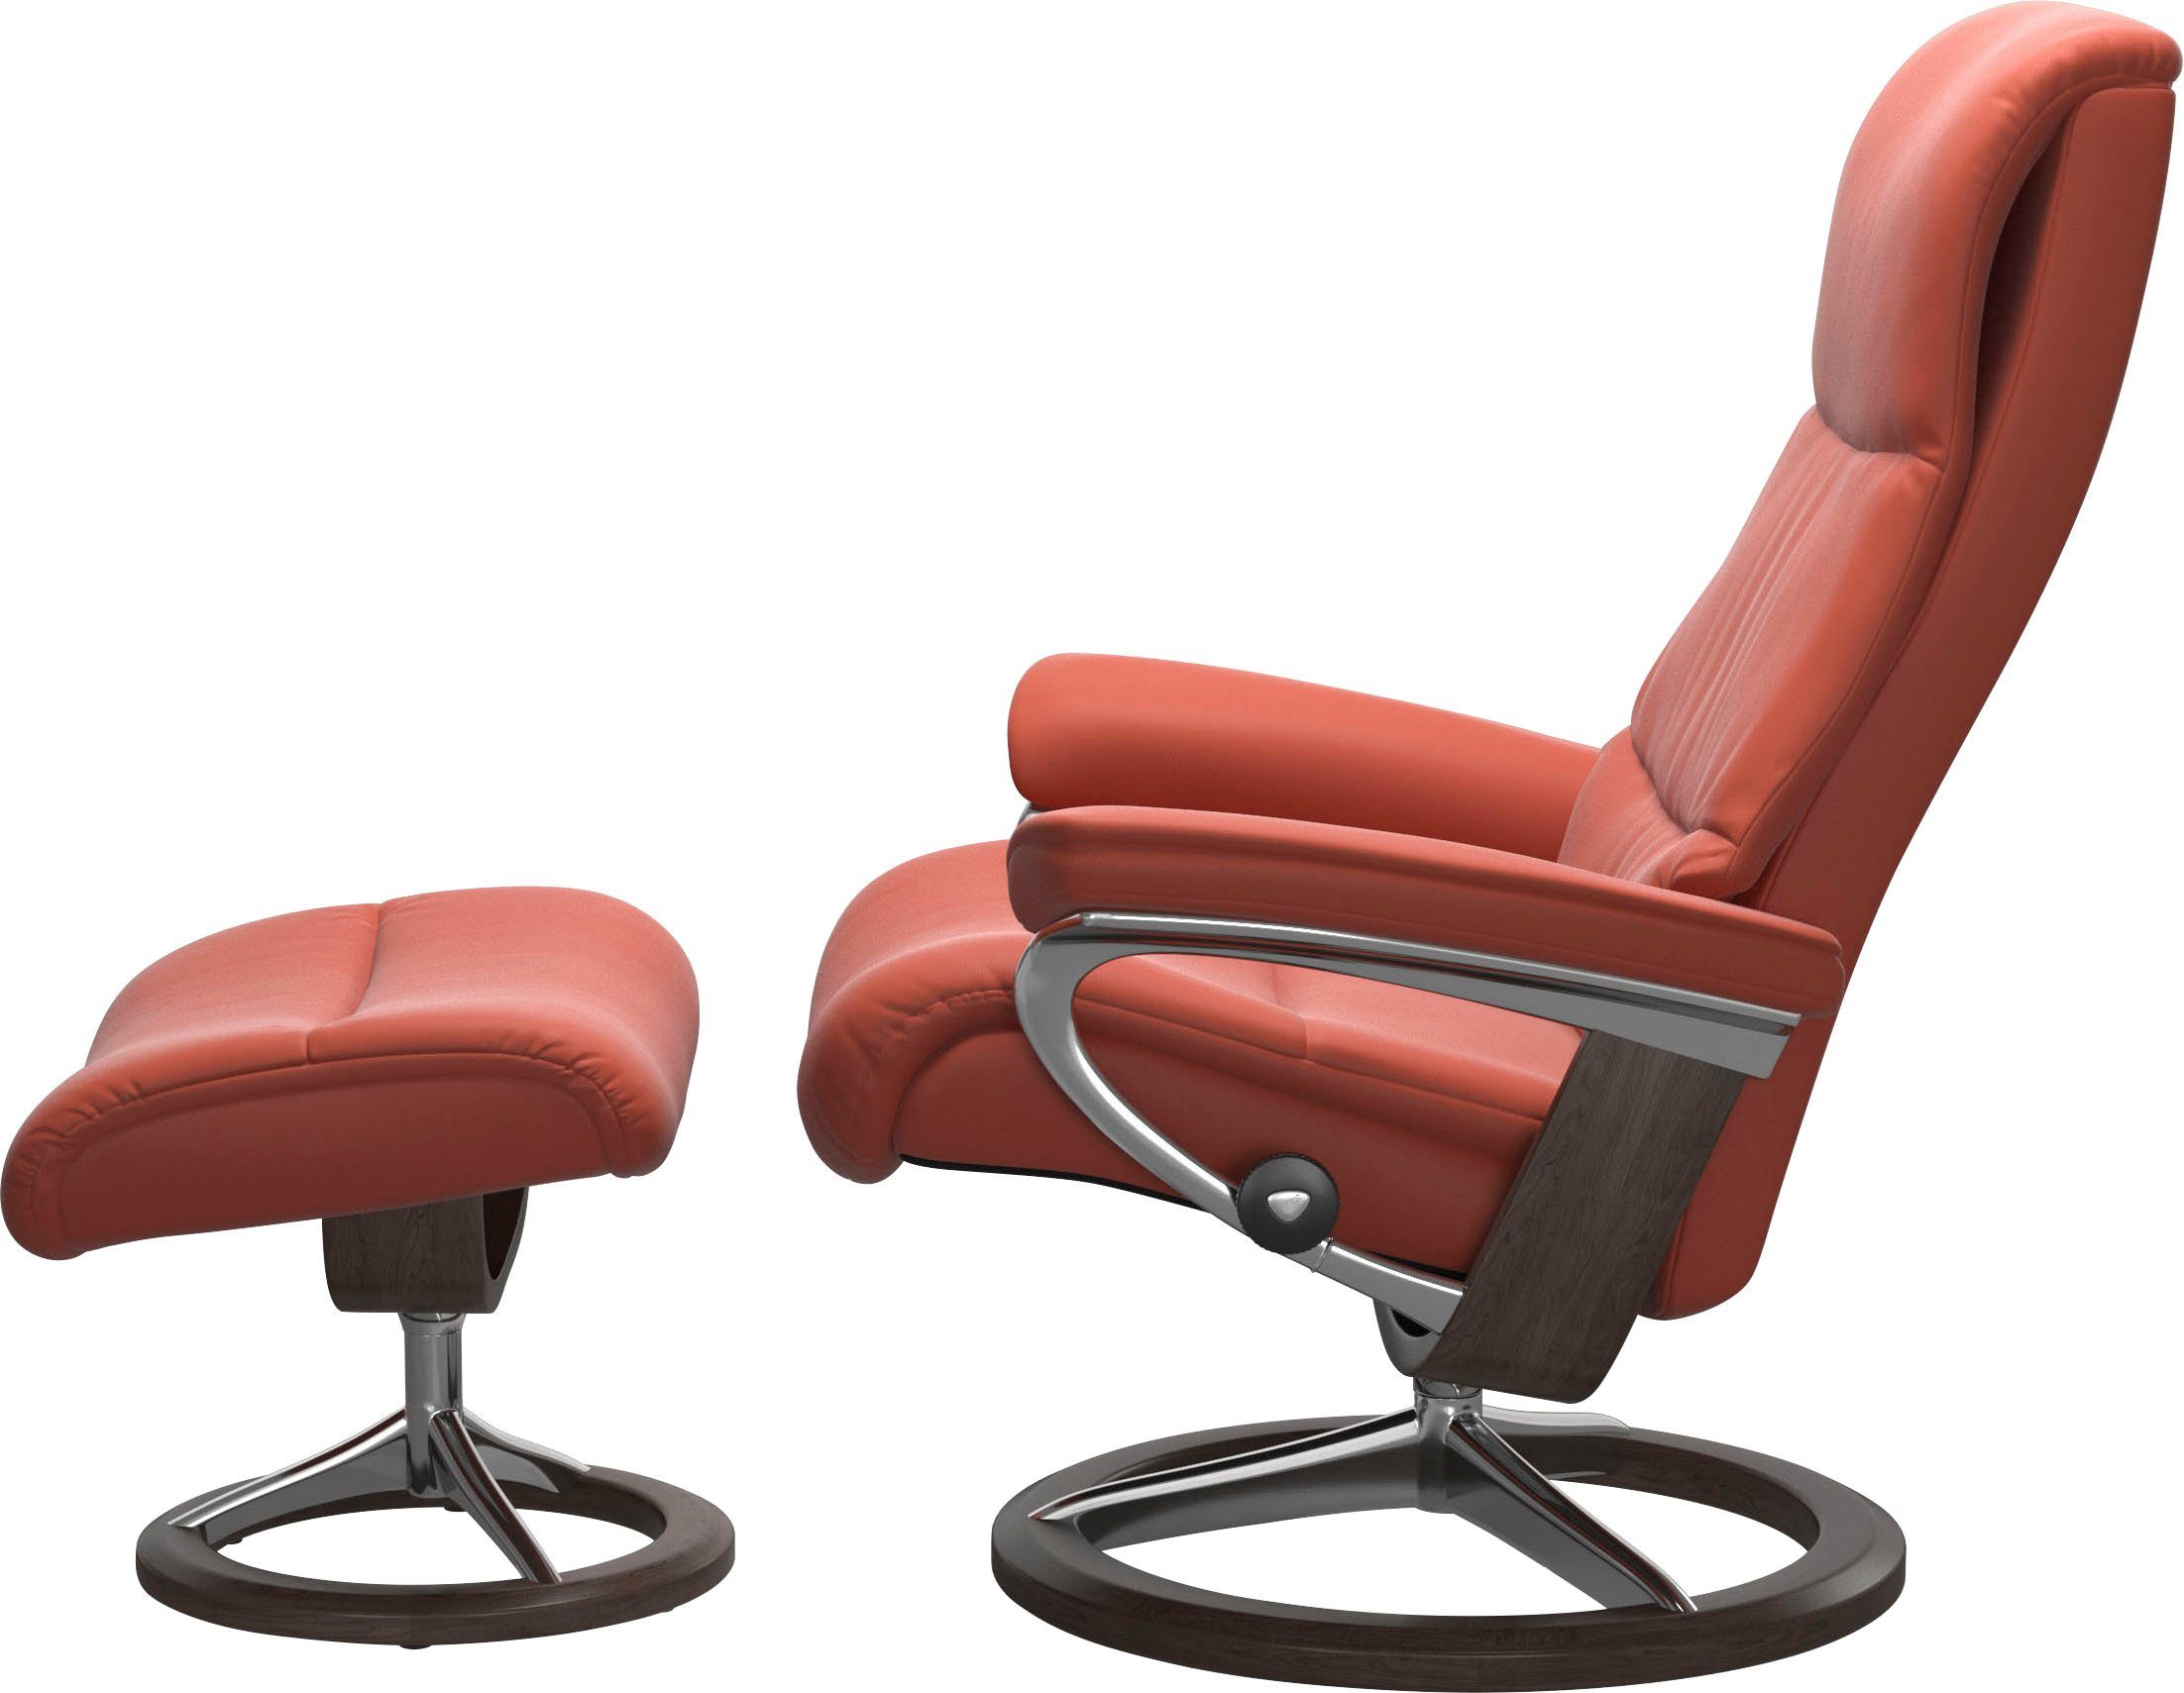 Signature Stressless® Größe Relaxsessel L,Gestell mit Base, View, Wenge